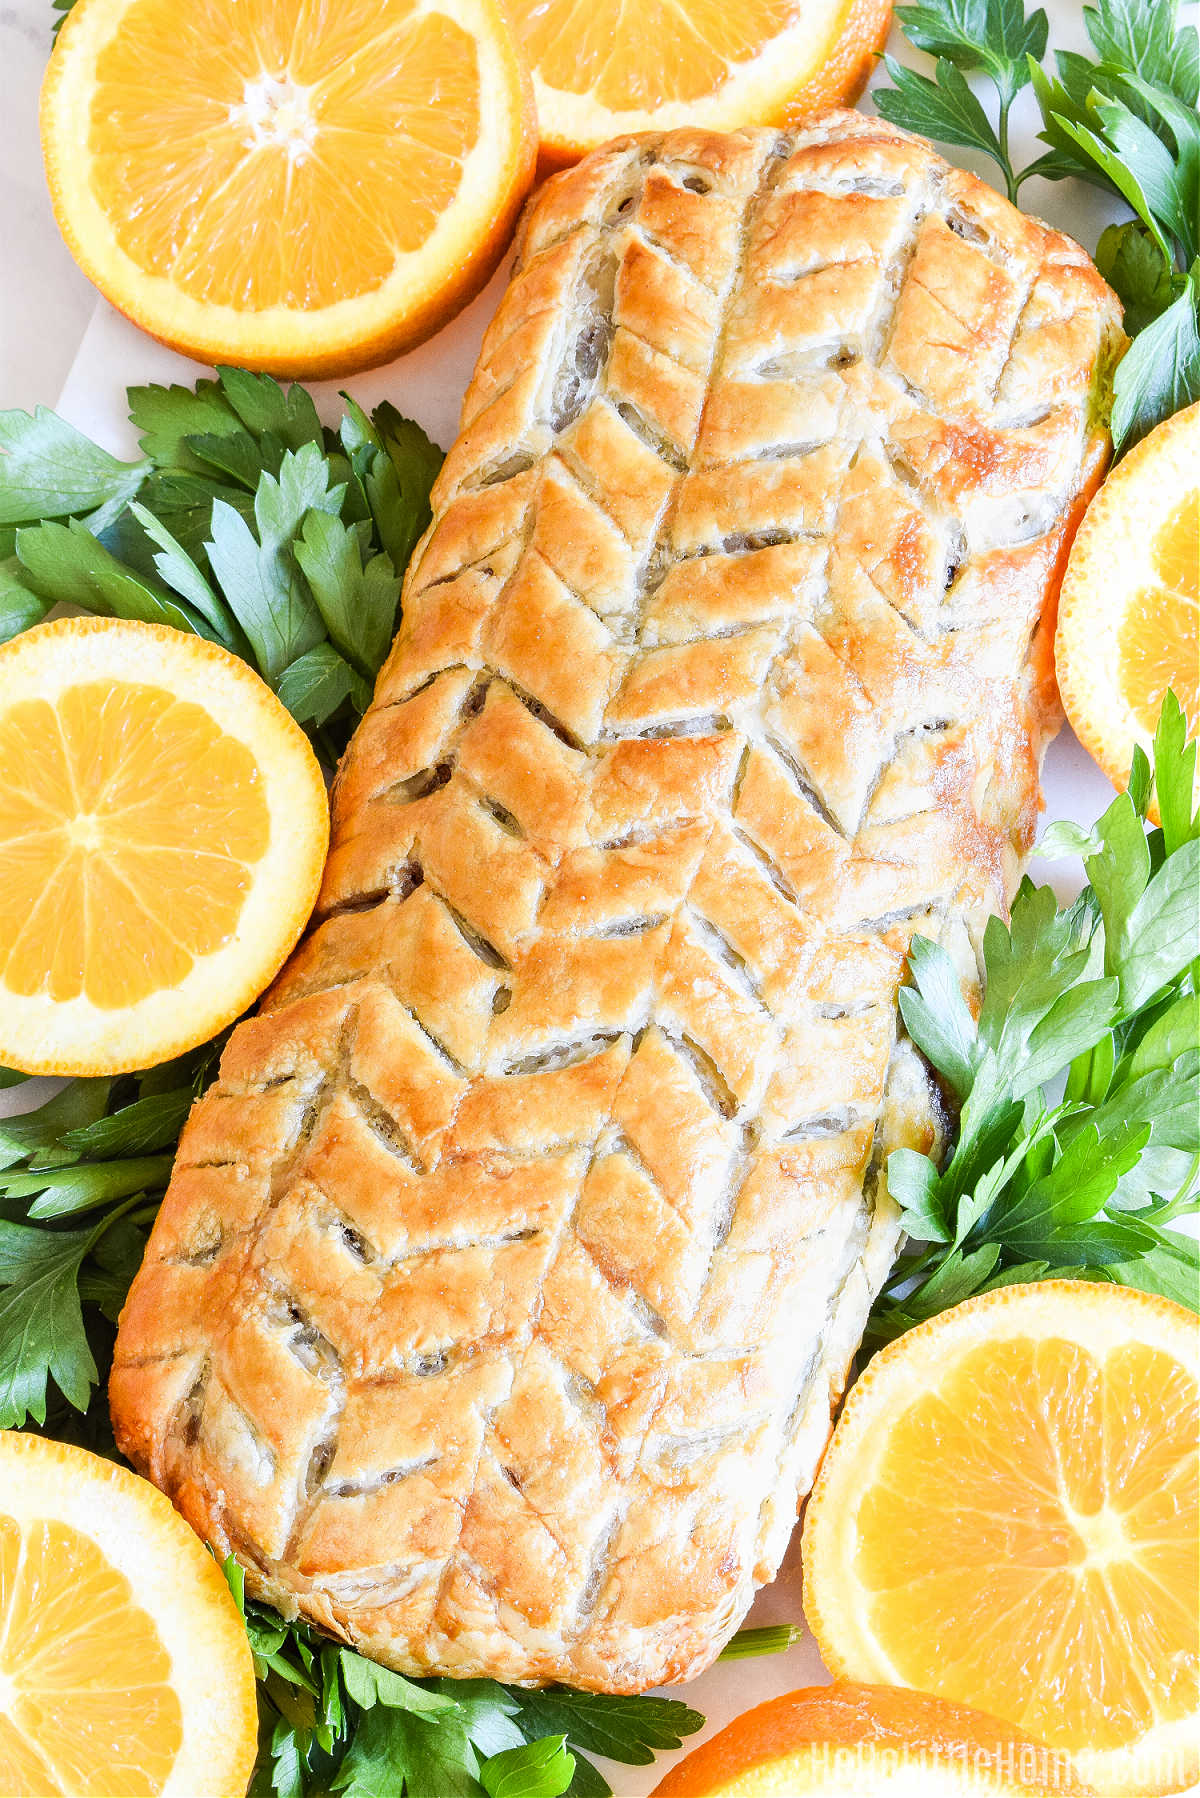 The finished Vegetarian Wellington on a platter surrounded by herbs and orange slices.